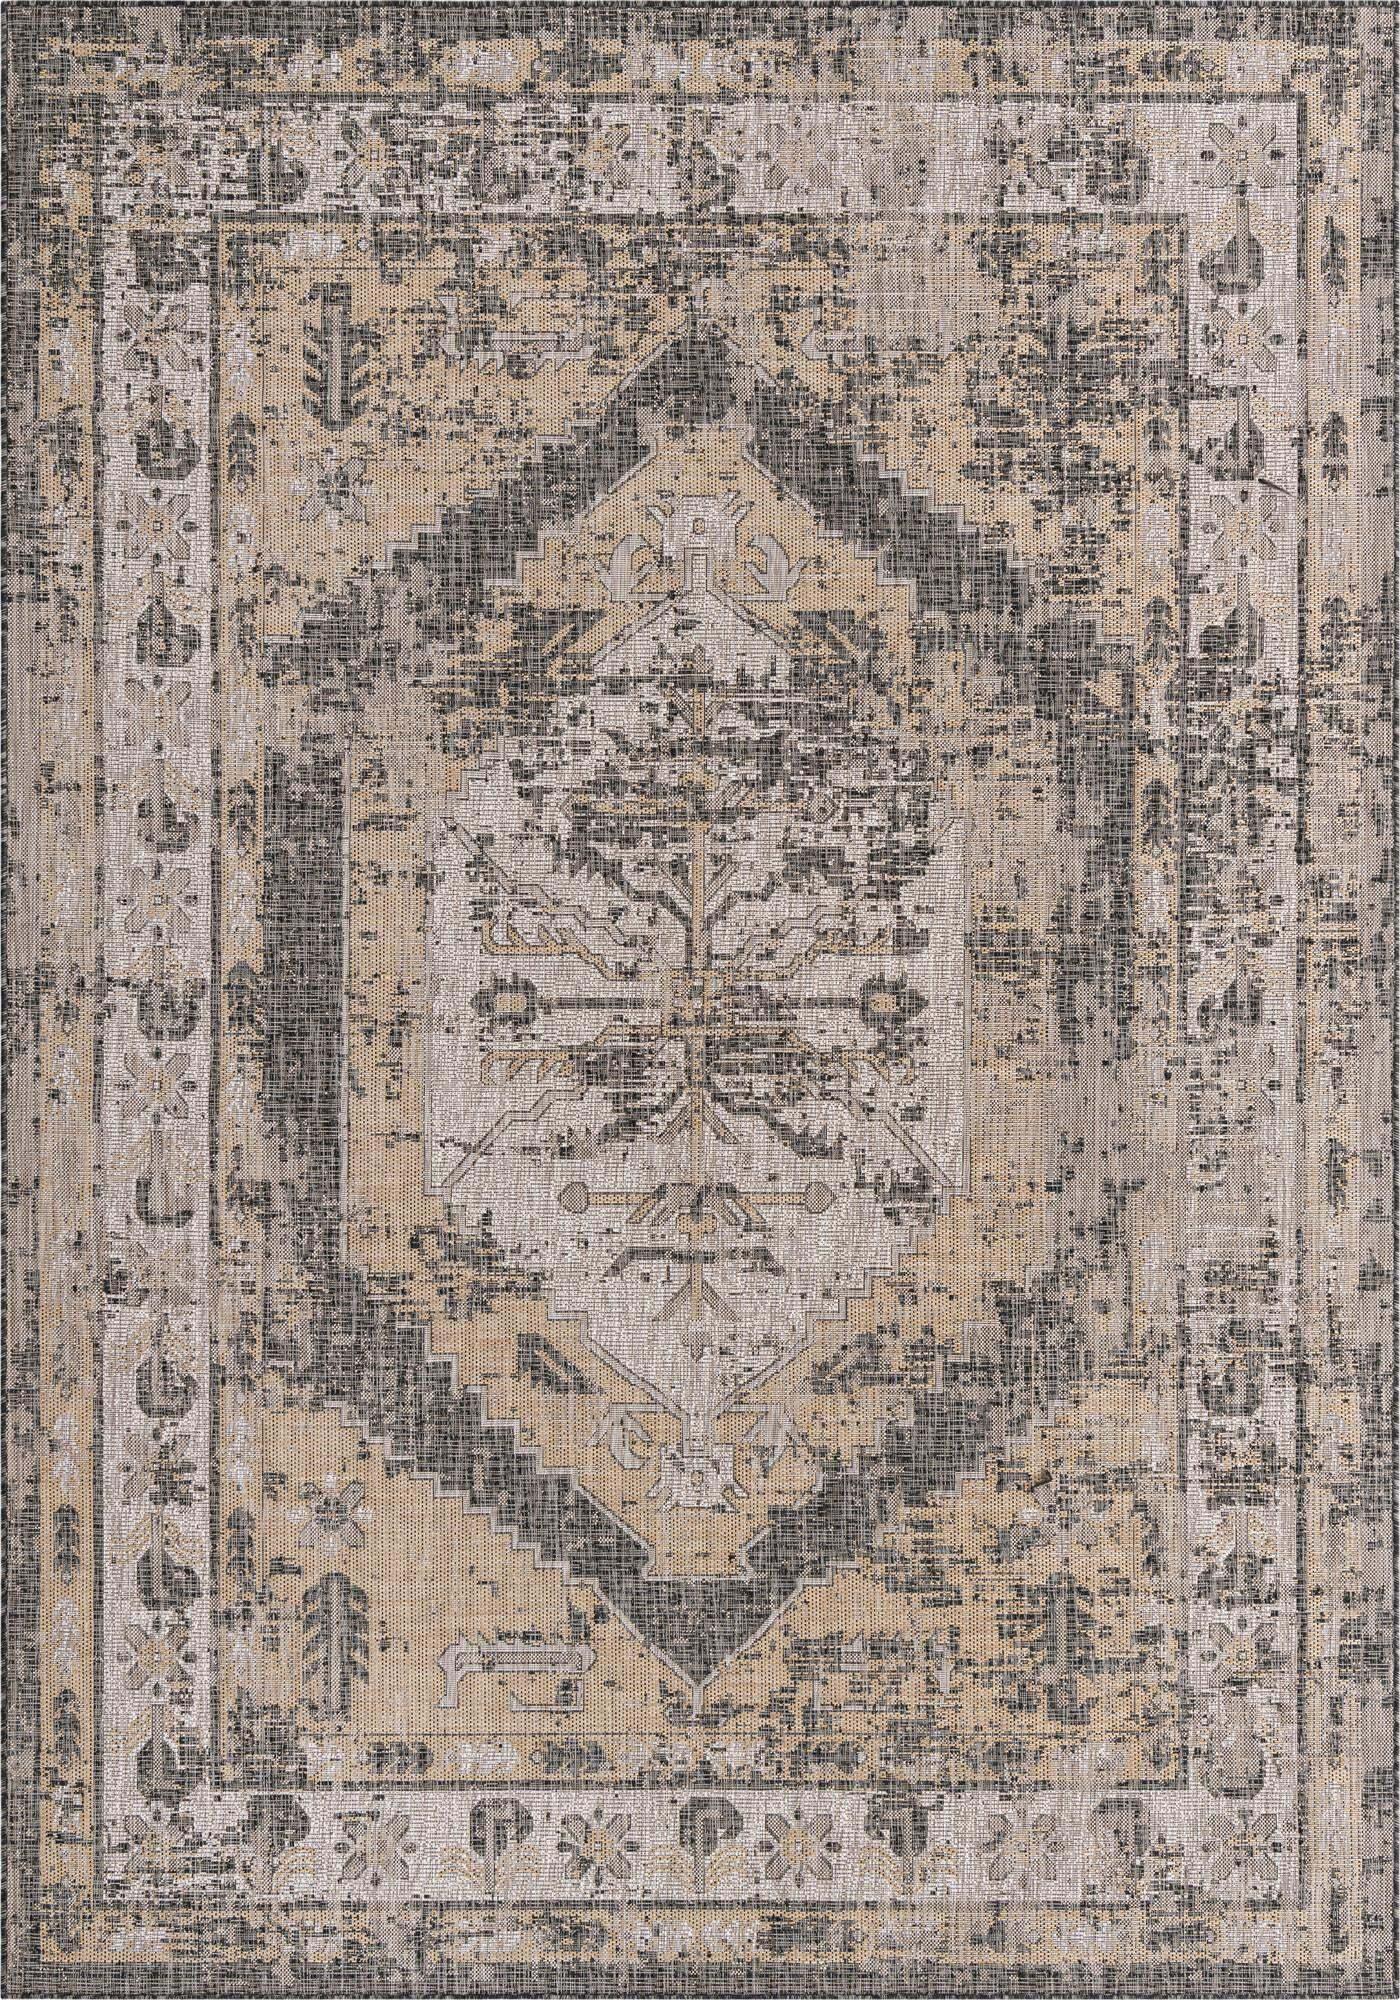 Unique Loom Outdoor Rugs - Outdoor Traditional Medallion Rectangular 8x11 Rug Charcoal & Beige